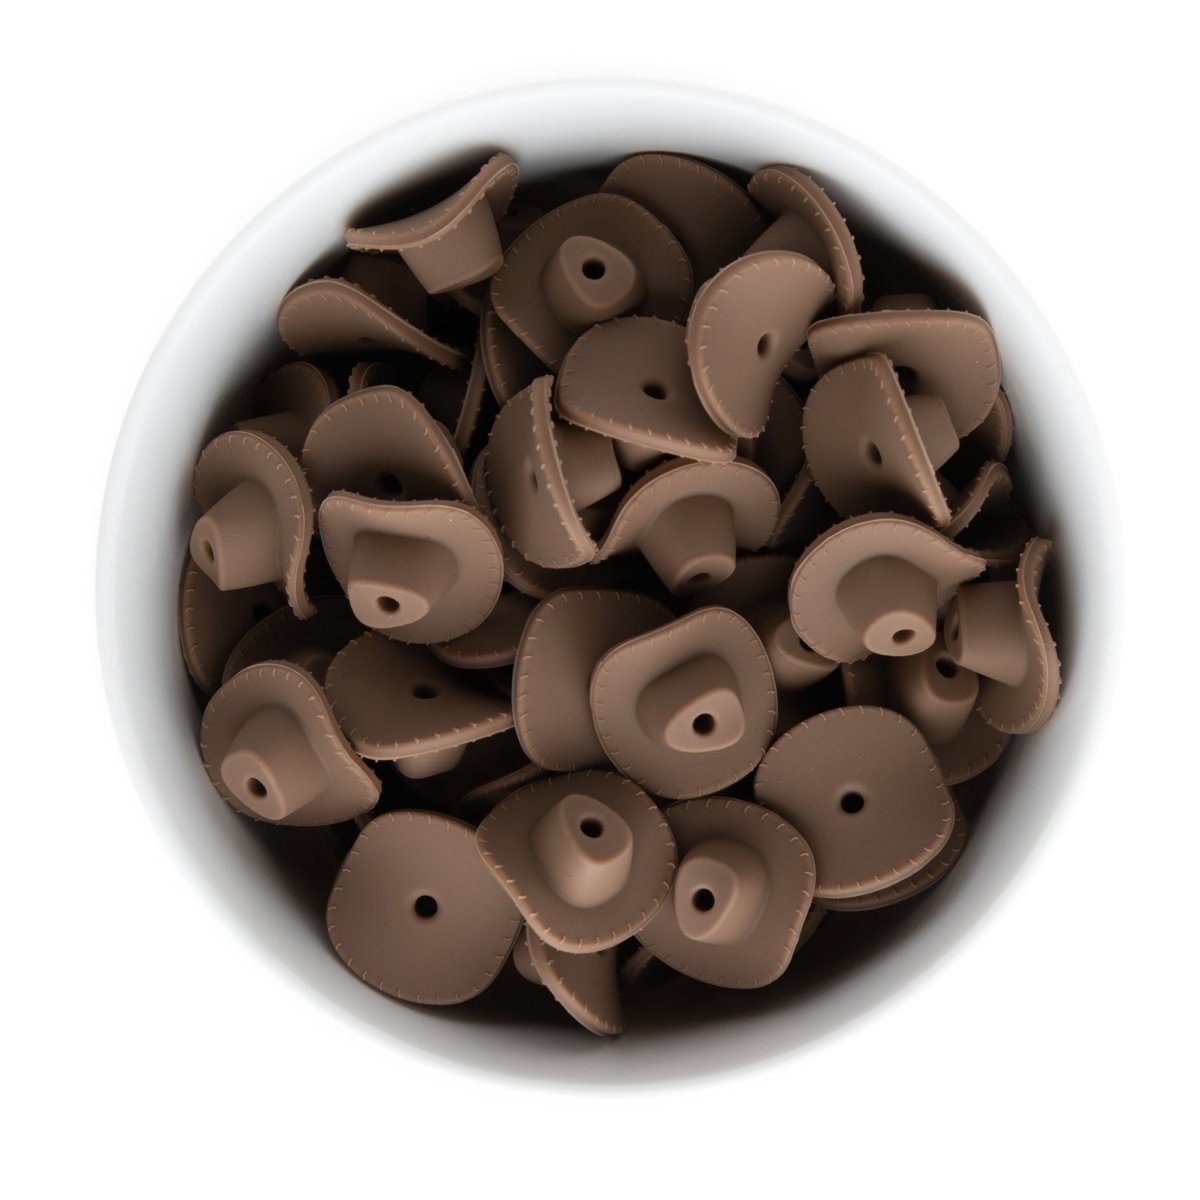 Silicone Focal Beads Cowboy Hats Earth Brown from Cara & Co Craft Supply